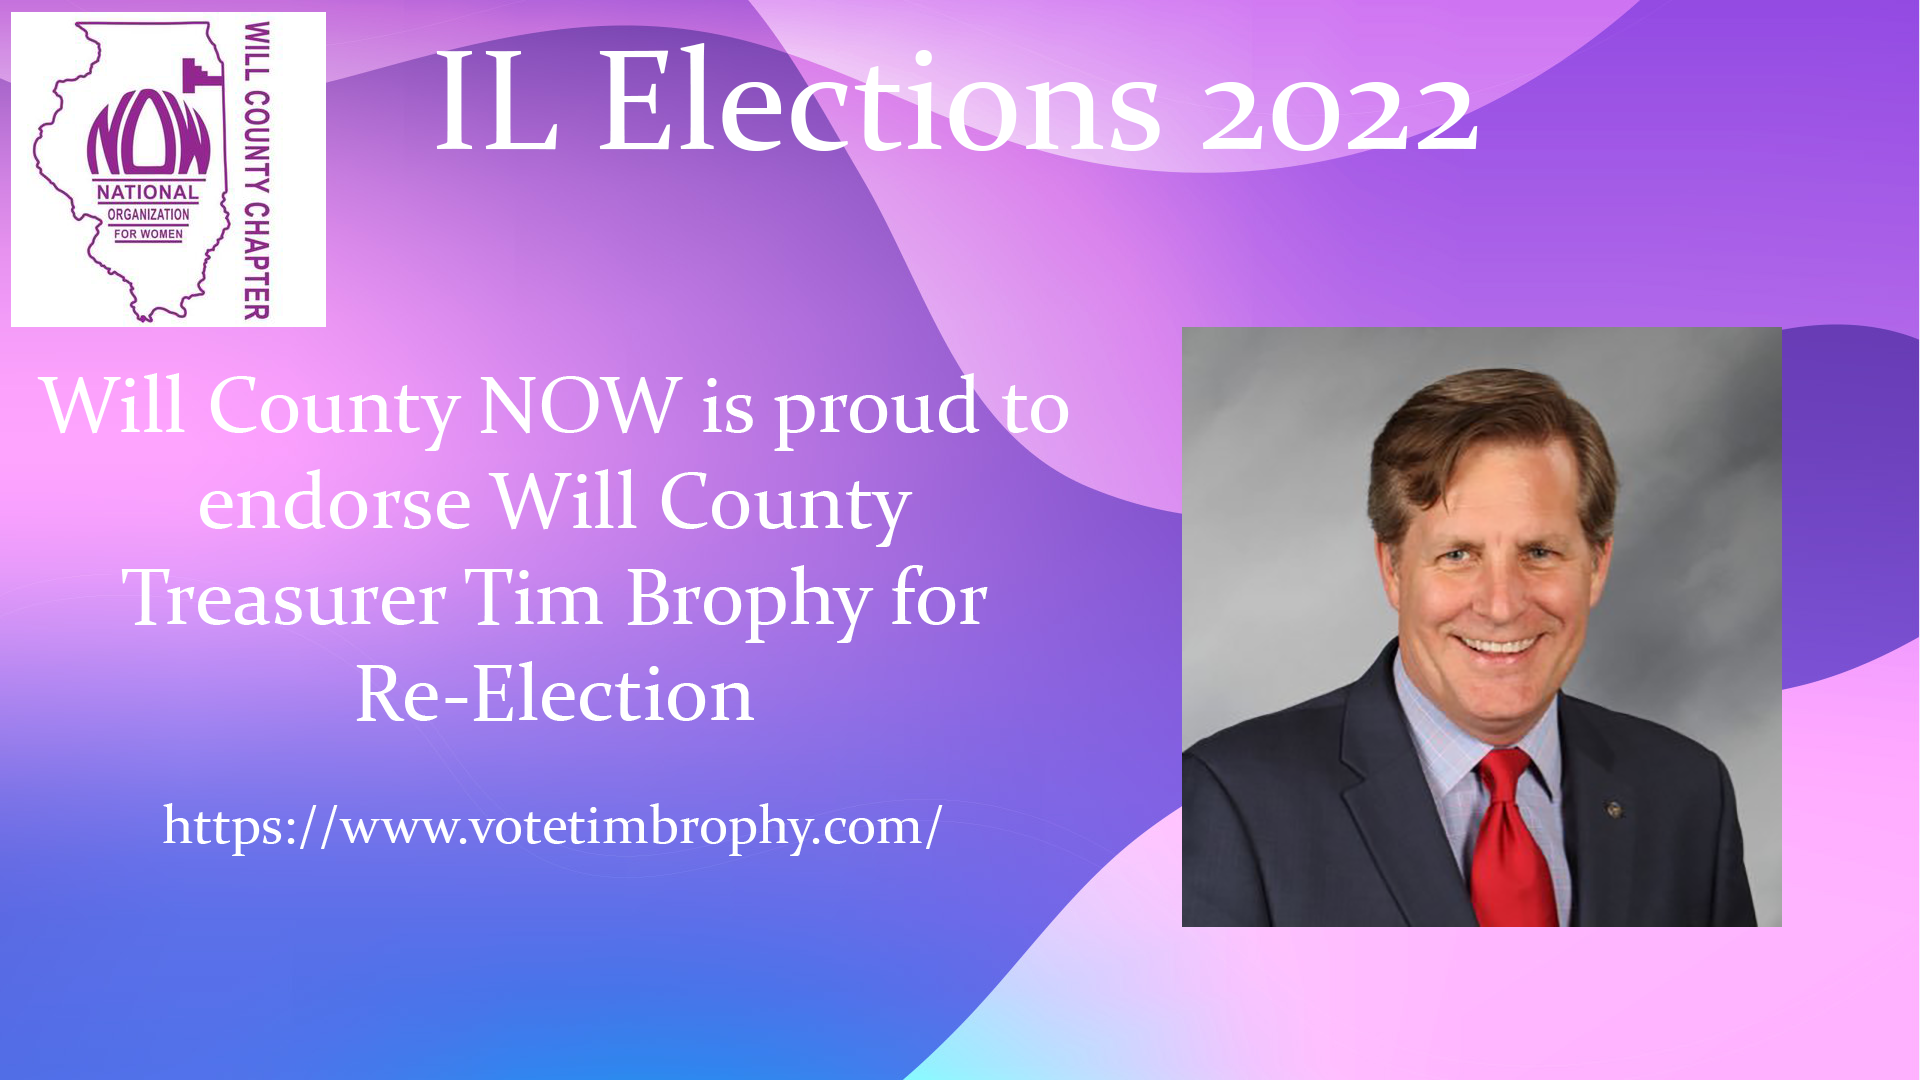 Will County NOW Endorses Will County Treasurer Tim Brophy for Re-Election